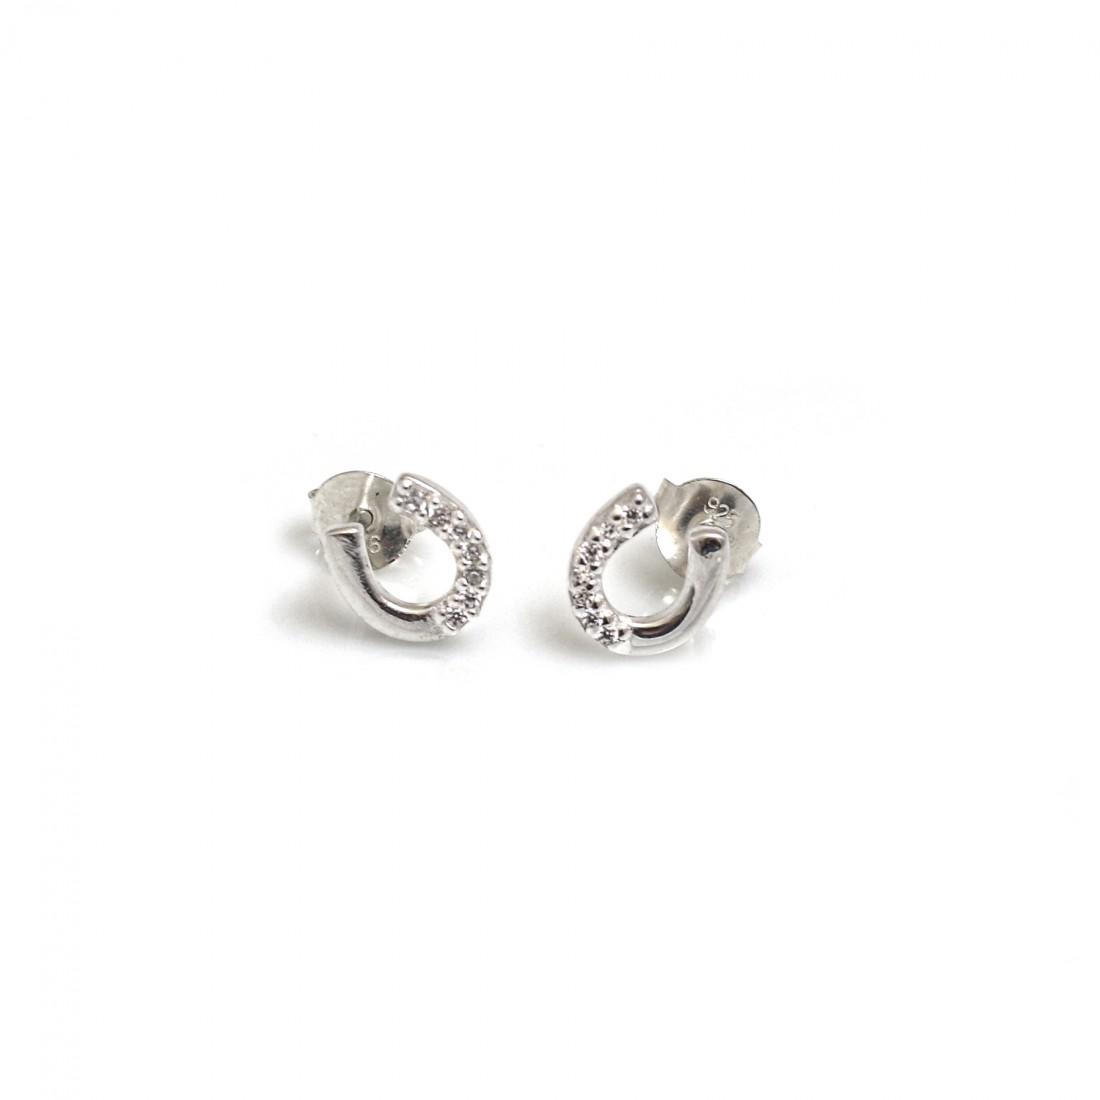 CZ and Sterling Silver Horseshoe Stud Earrings